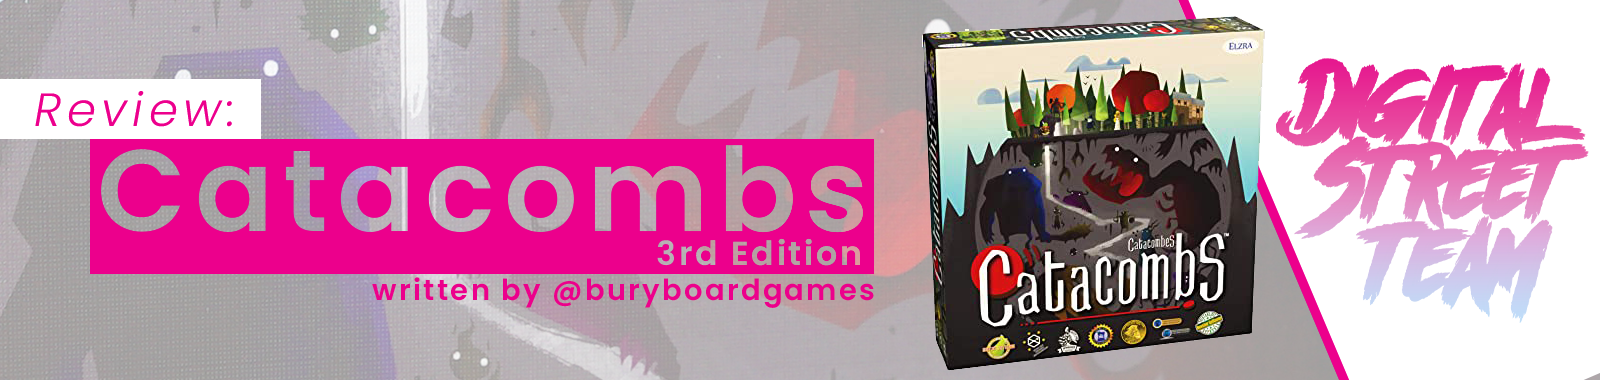 Review: Catacombs 3rd Edition - by @buryboardgames